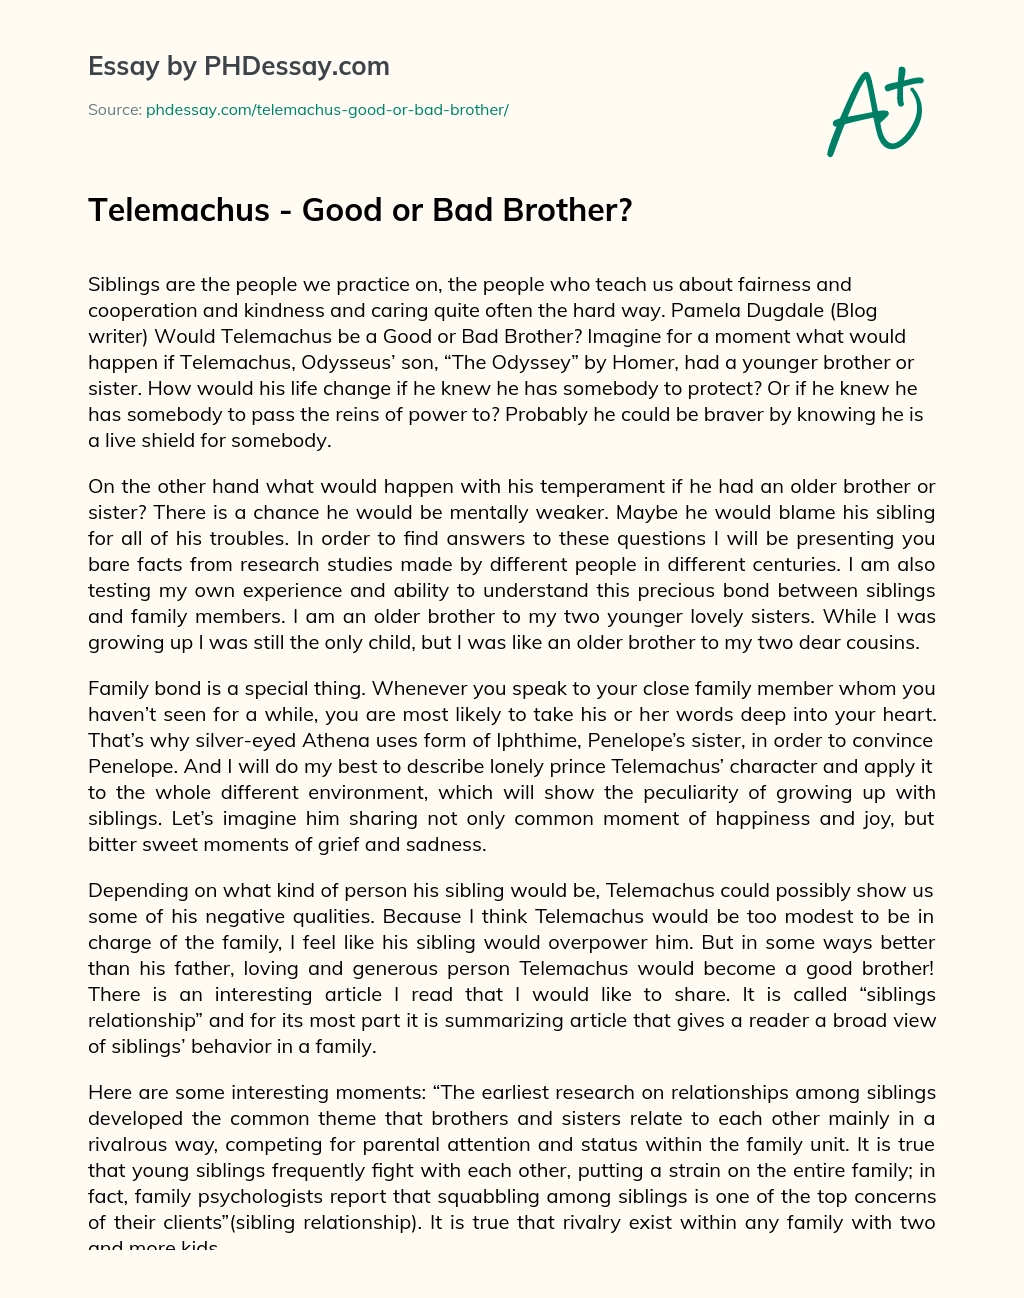 Telemachus – Good or Bad Brother? essay